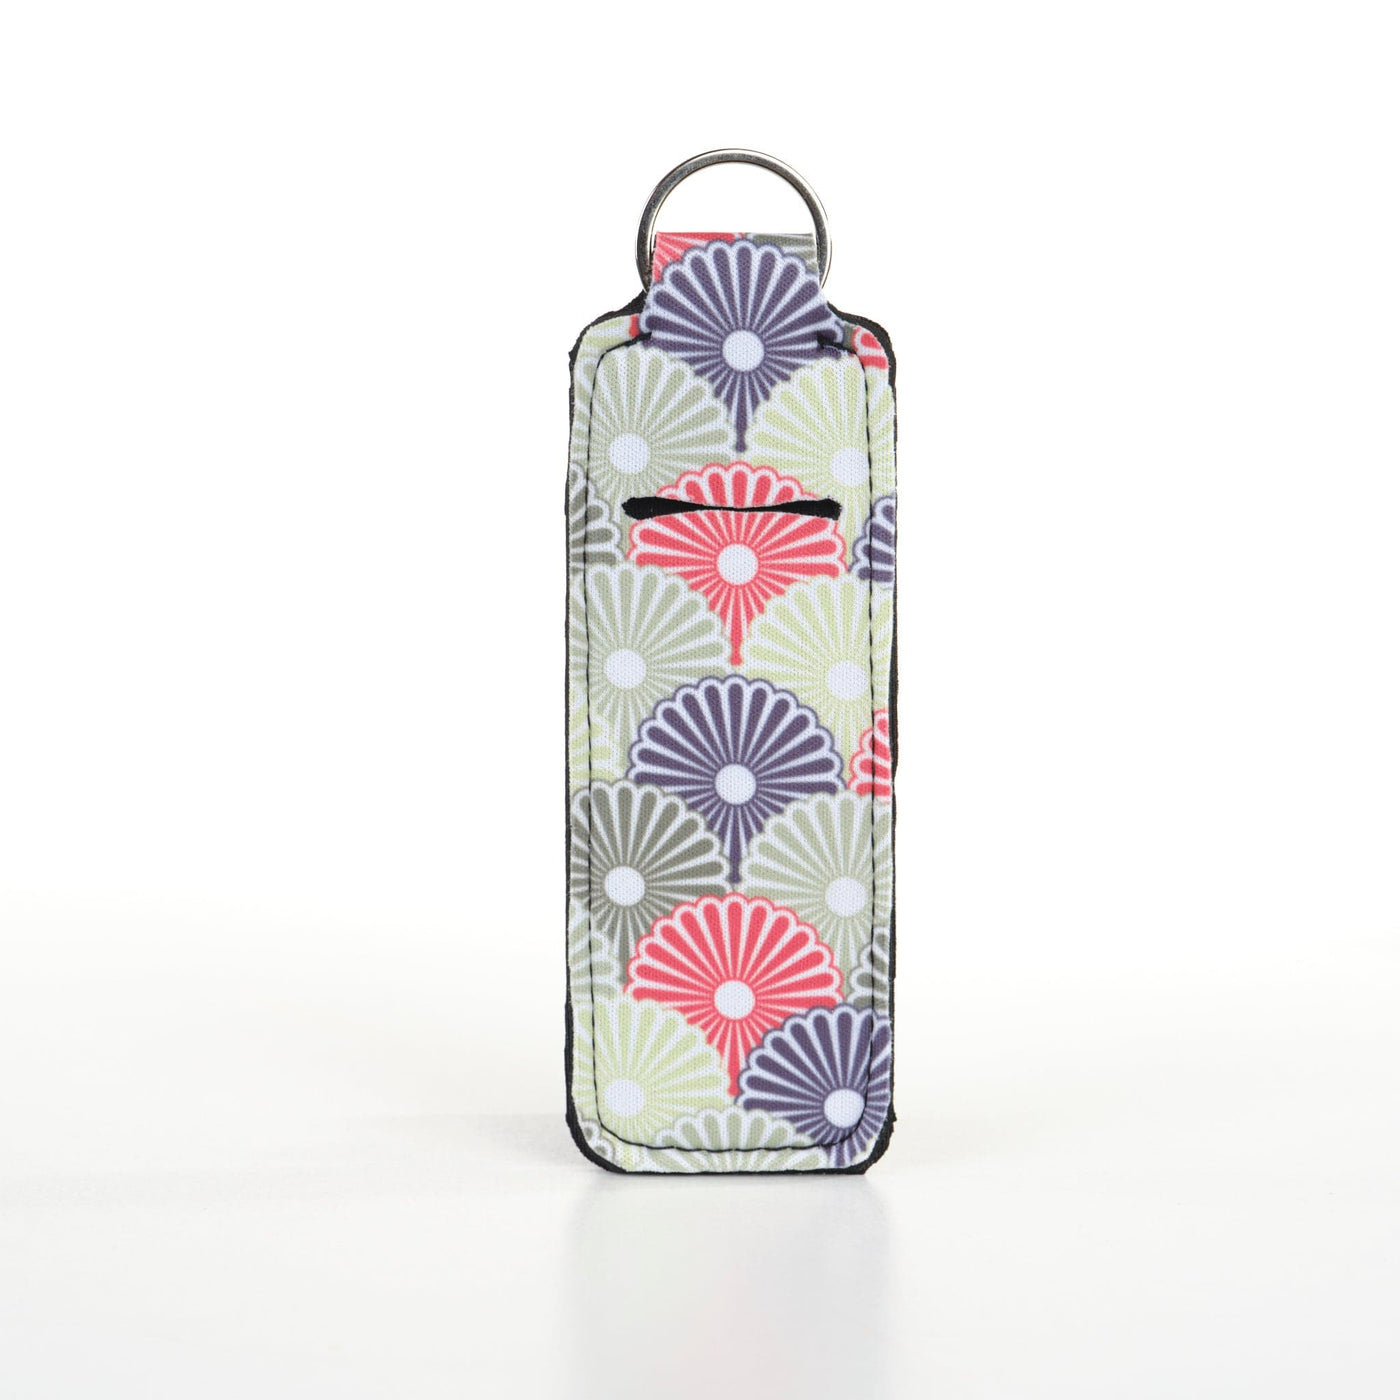 Neoprene Keychain for On Guard Sanitizing Mist - Oil Life Canada - Canada's Best Essential Oil Supplies